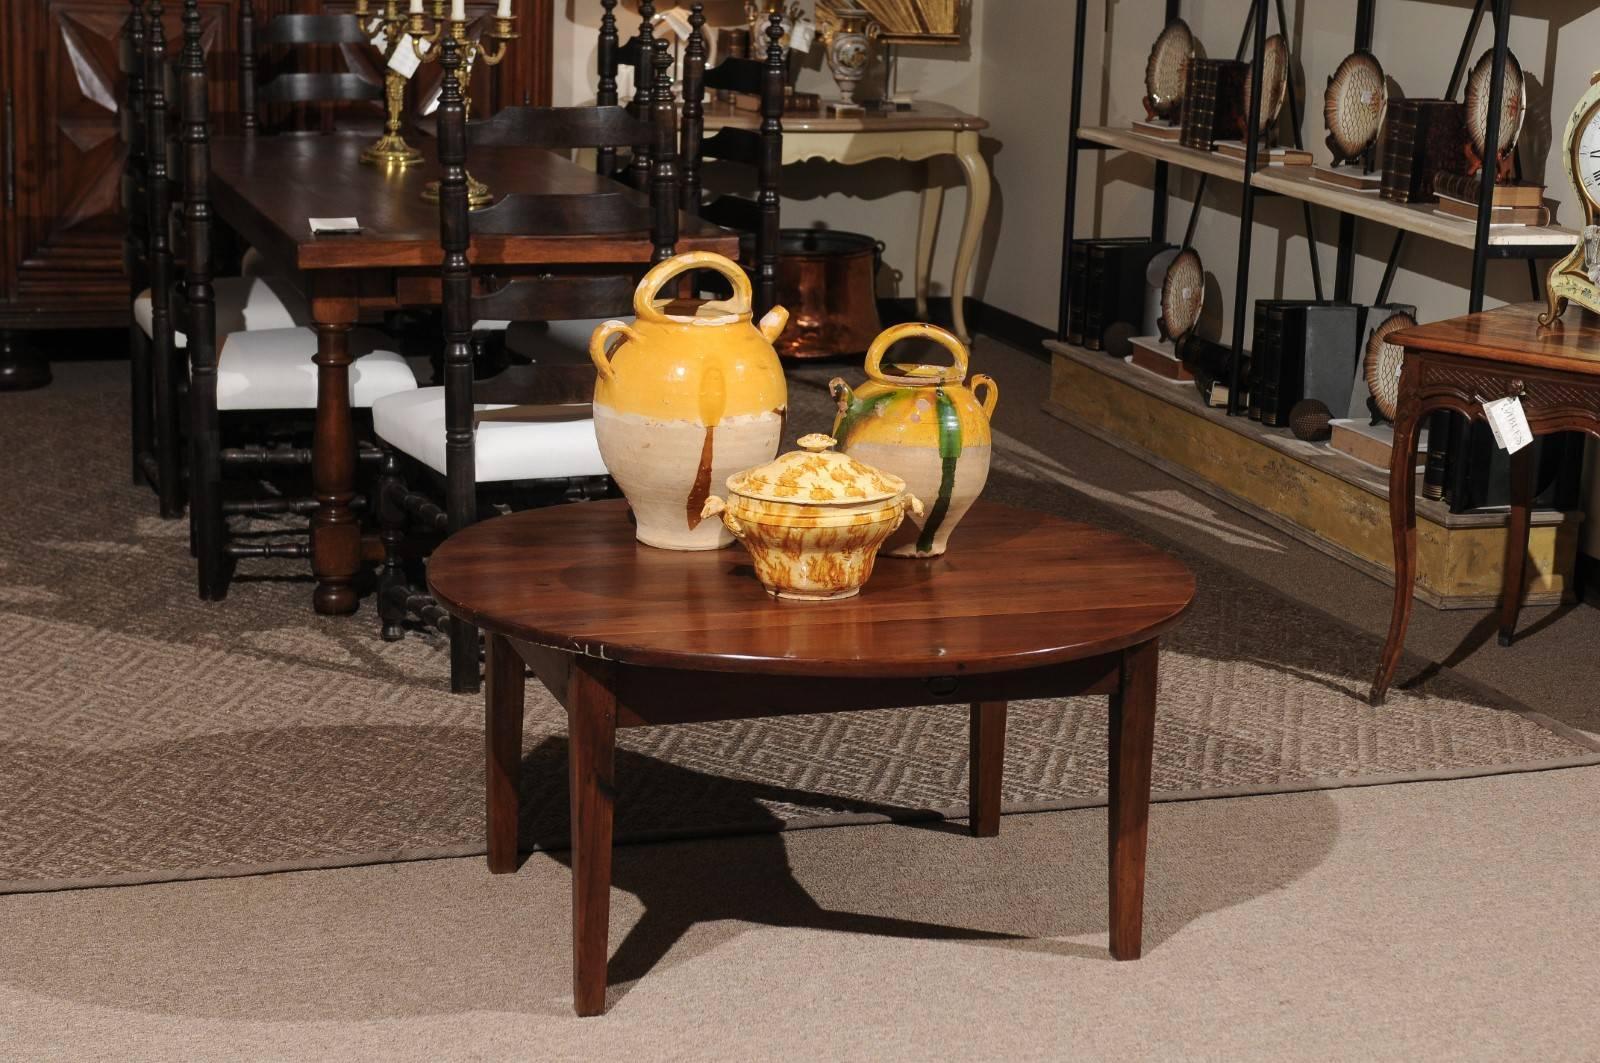 20th century French cherry coffee tables, circa 1900
We love being able to find the French drop leaf tables cut down for coffee tables. They are so useful because you can use the smaller rectangular shape or the full round table when you need to.